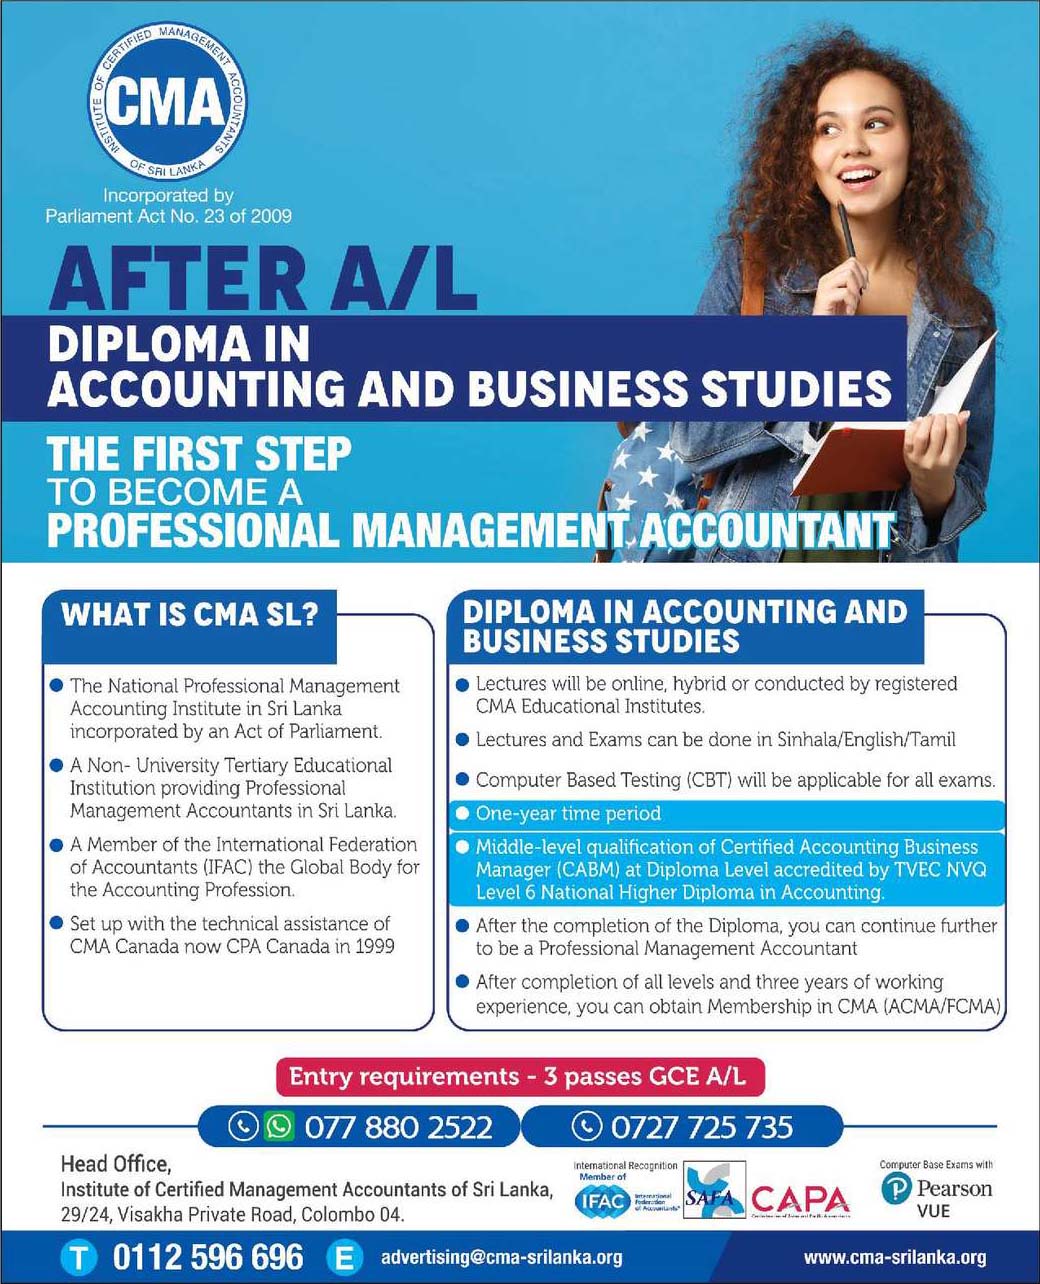 Diploma in Accounting and Business Studies Course from CMA Sri Lanka